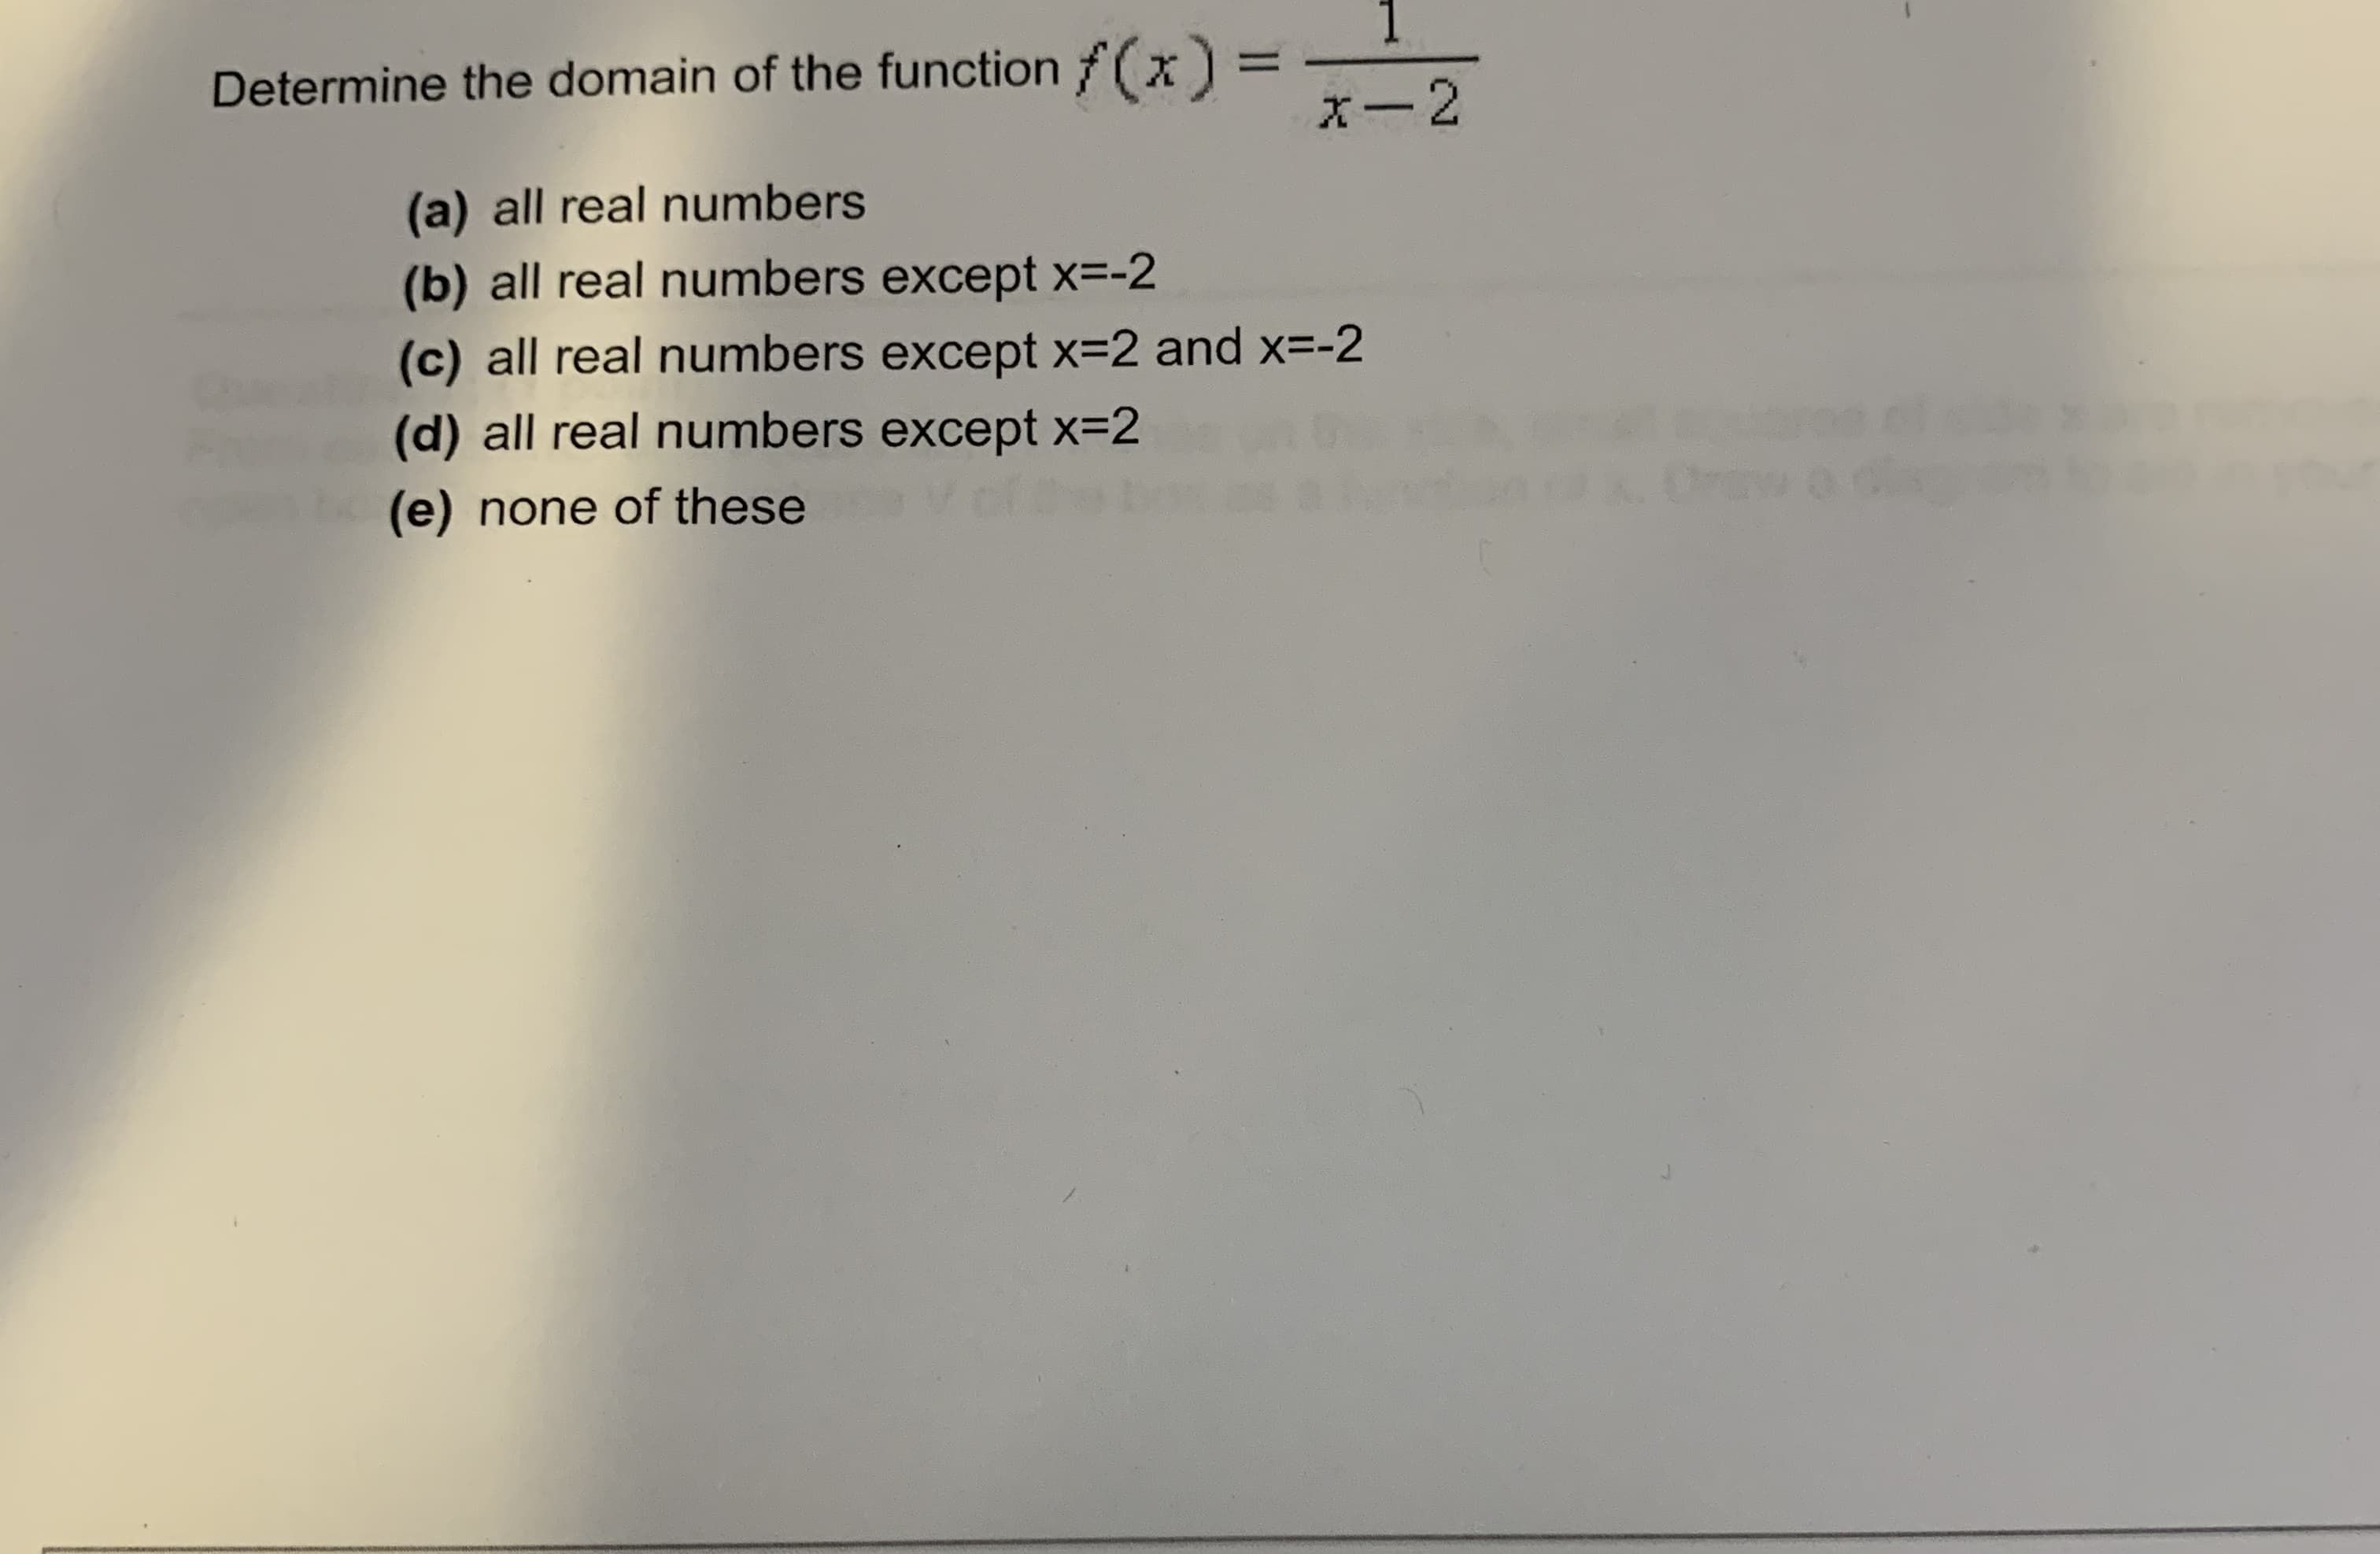 1.
Determine the domain of the function f(x)
x-2
(a) all real numbers
(b) all real numbers except x=-2
(c) all real numbers except x=2 and x=-2
(d) all real numbers except x=2
(e) none of these
